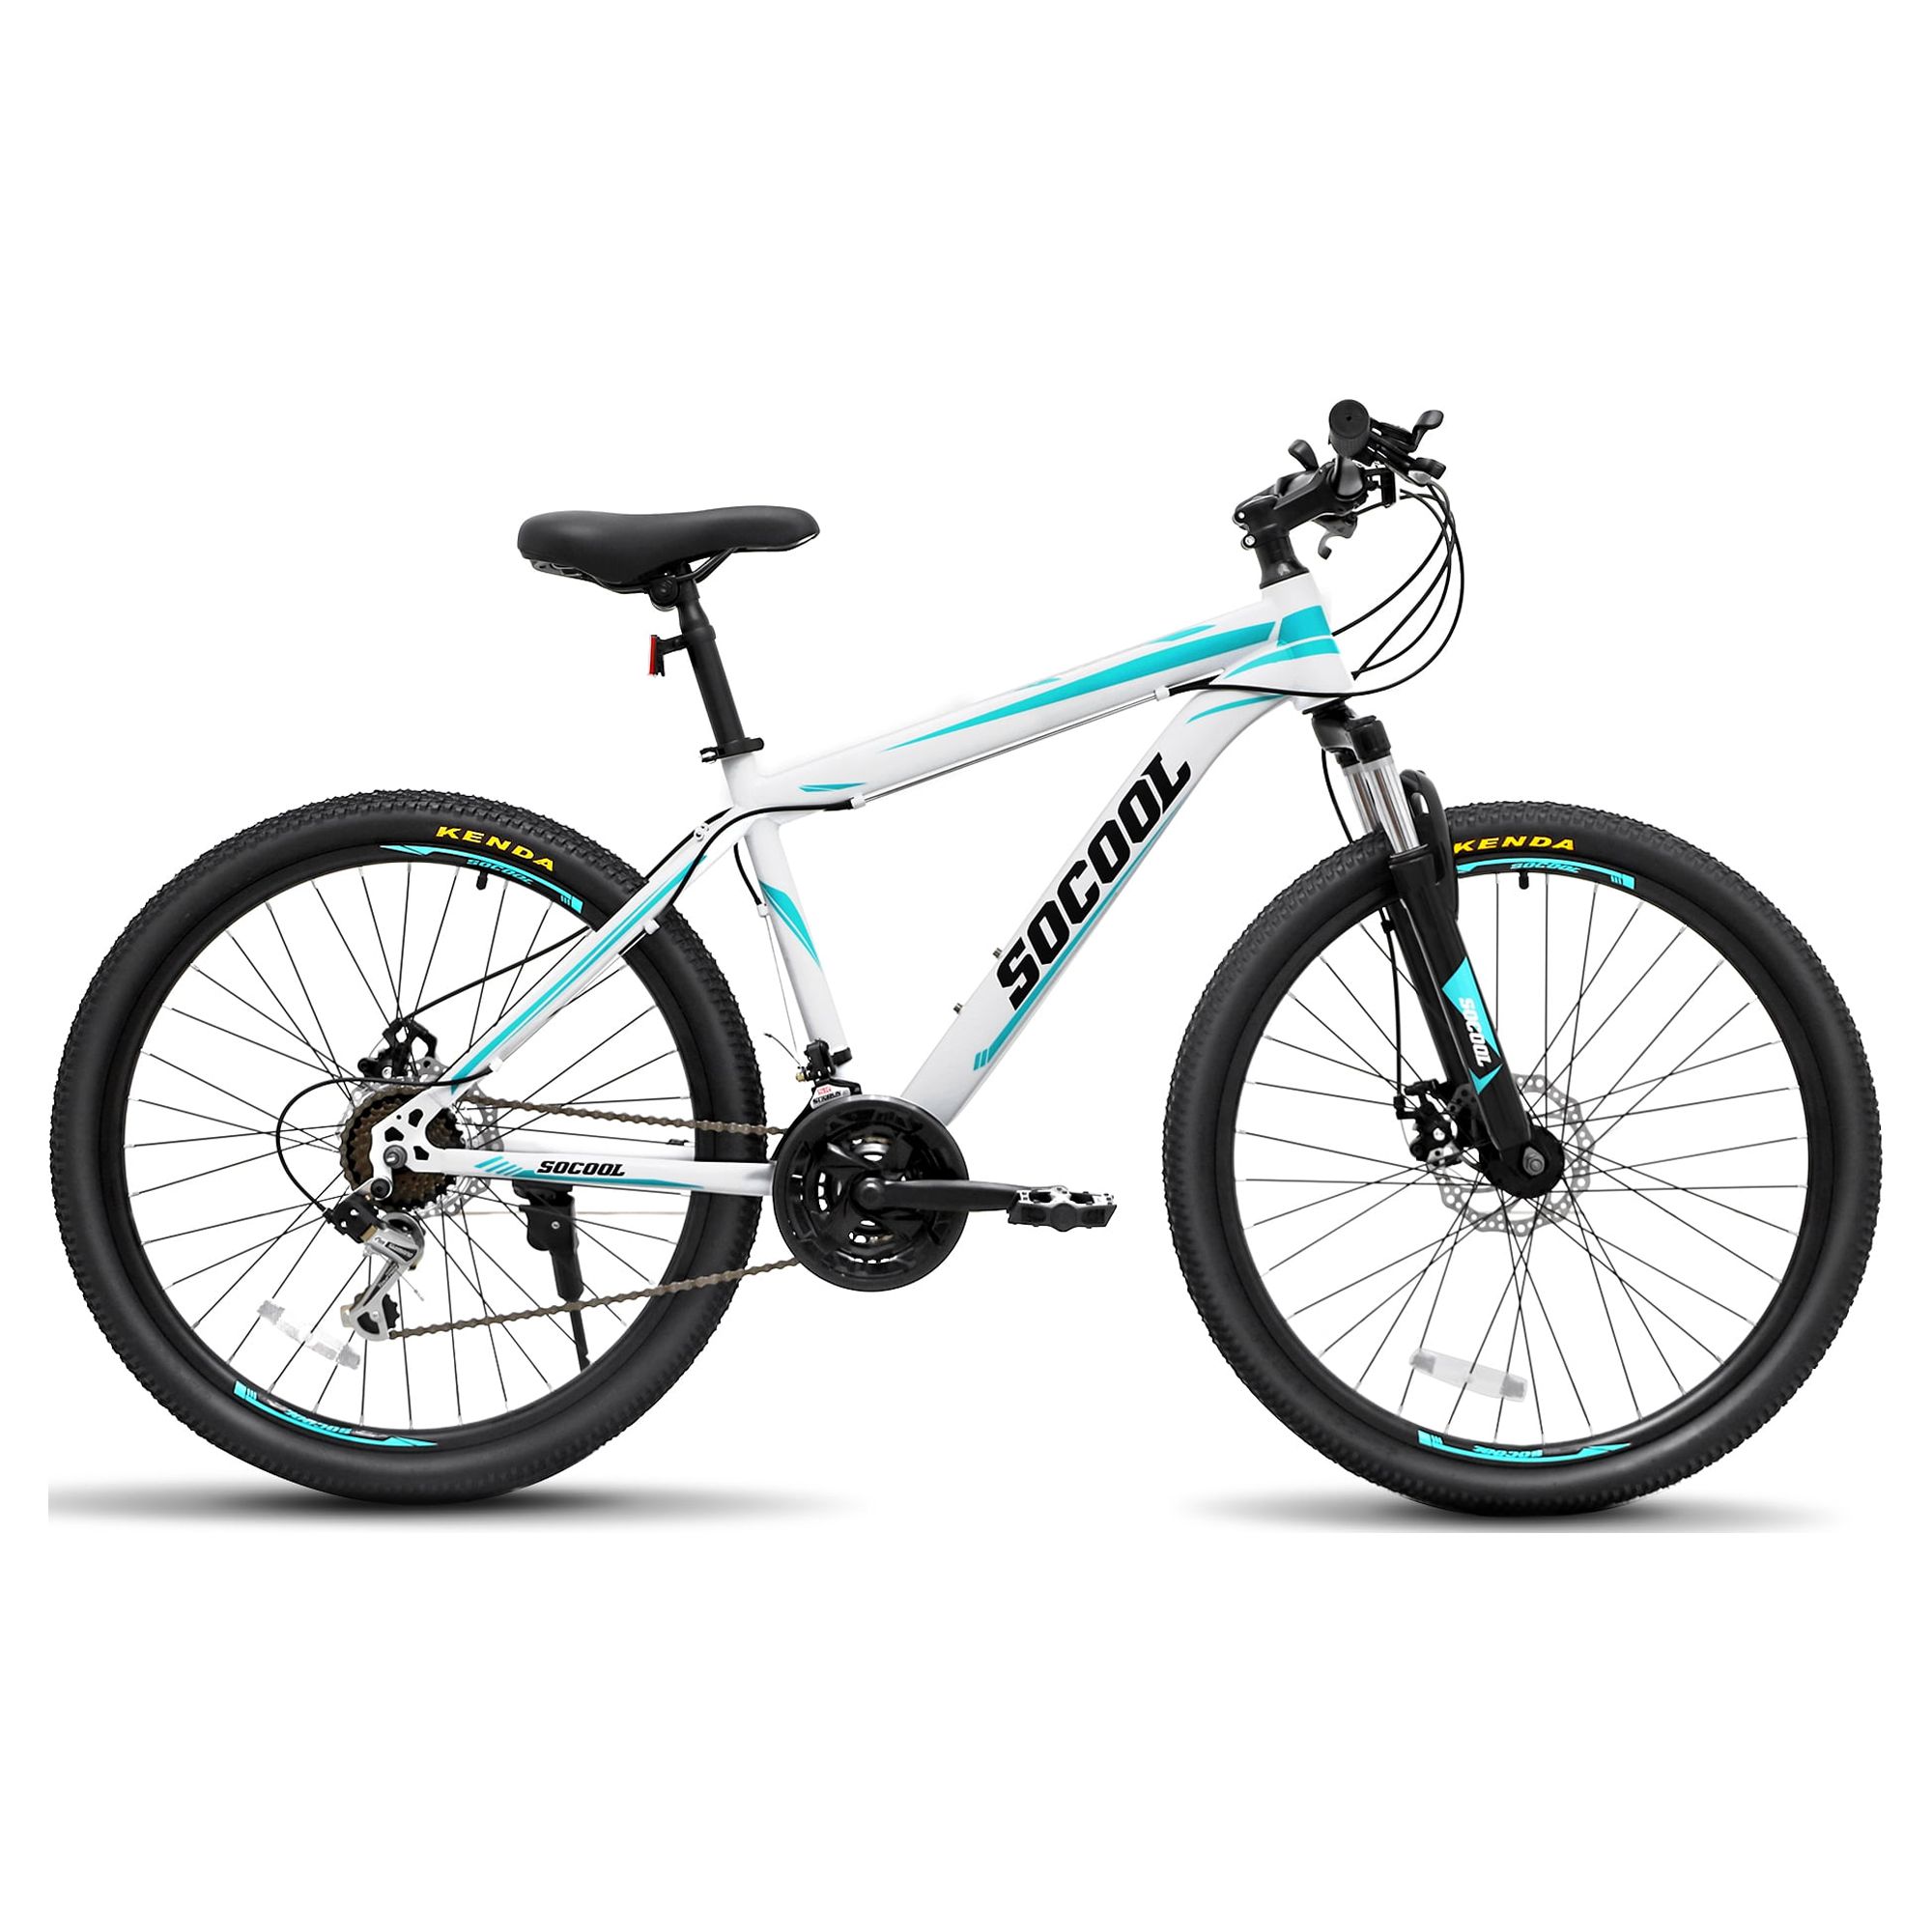 SOCOOL Mountain Bikes with 26-Inch Wheels, Aluminum Frame and Pedals, 26" Bike for Adults and Youth, Shimano Parts, 21 Speed Mountain Bicycle -White & Black & Blue, VE1023BK - image 1 of 9